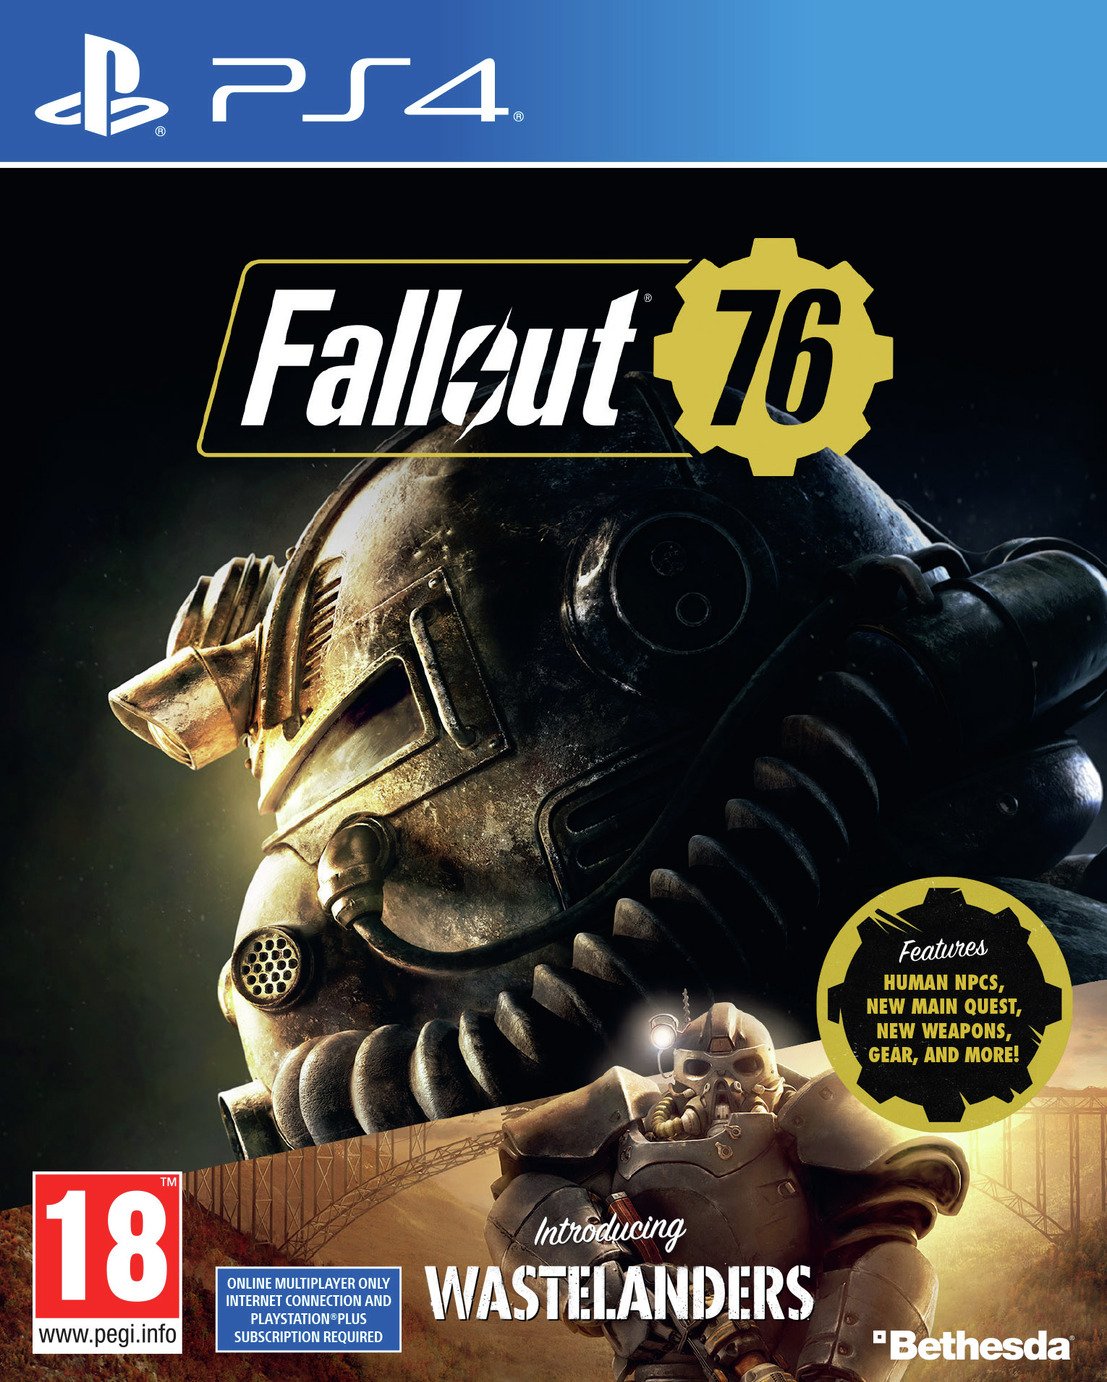 newest fallout game ps4